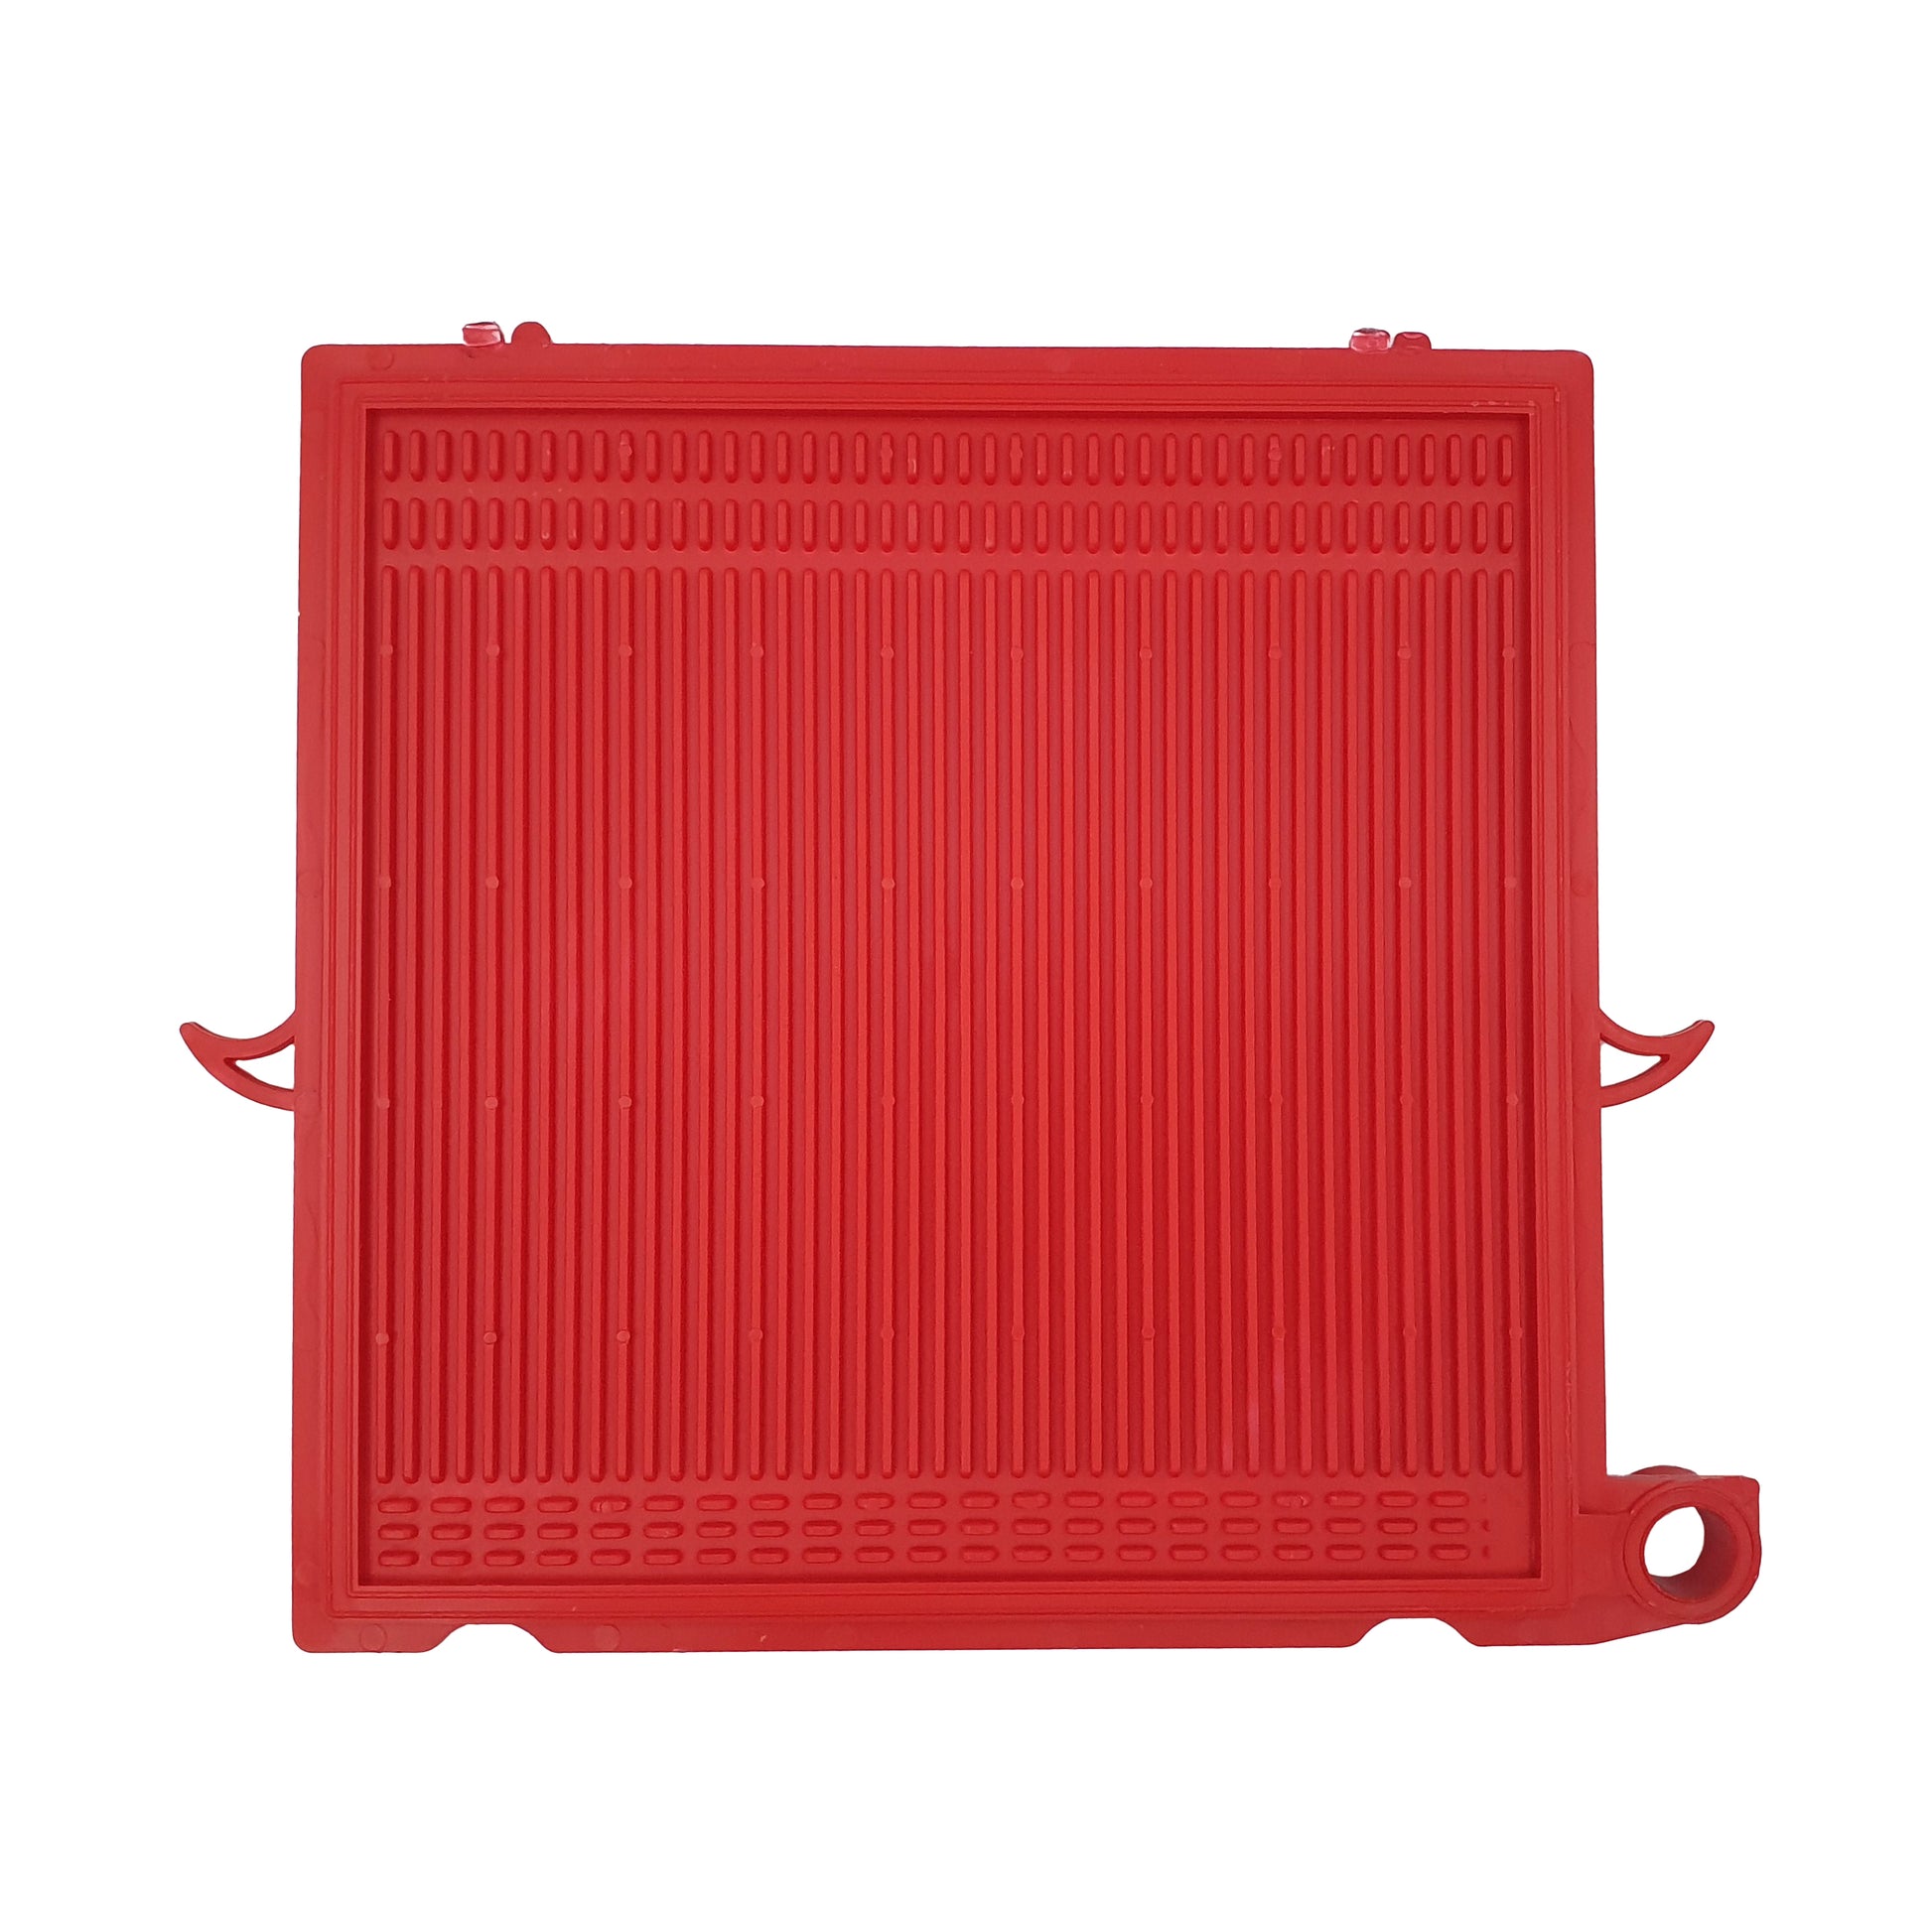 Closed frame red end plate for the Filter Rover Colombo.